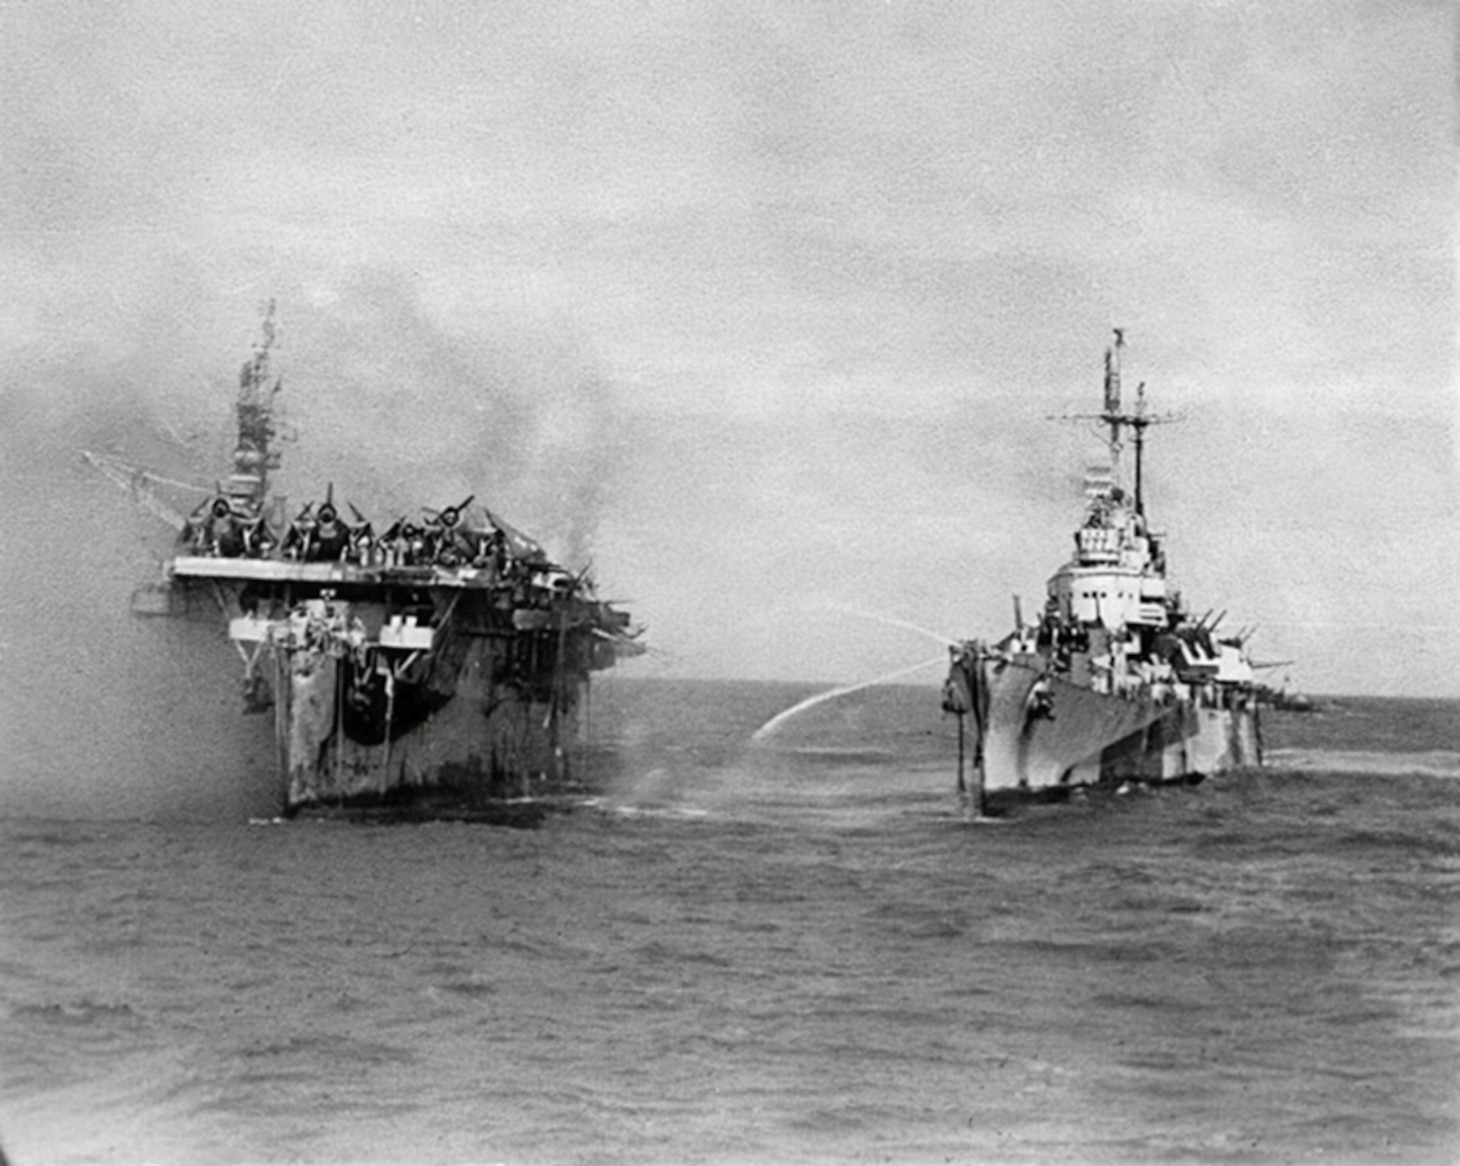 Battle of Leyte Gulf, October 1944. USS Birmingham (CL-62) comes alongside the burning USS Princeton (CVL-23) to assist with fire fighting, 24 October 1944. Official U.S. Navy Photograph, now in the collections of the National Archives.